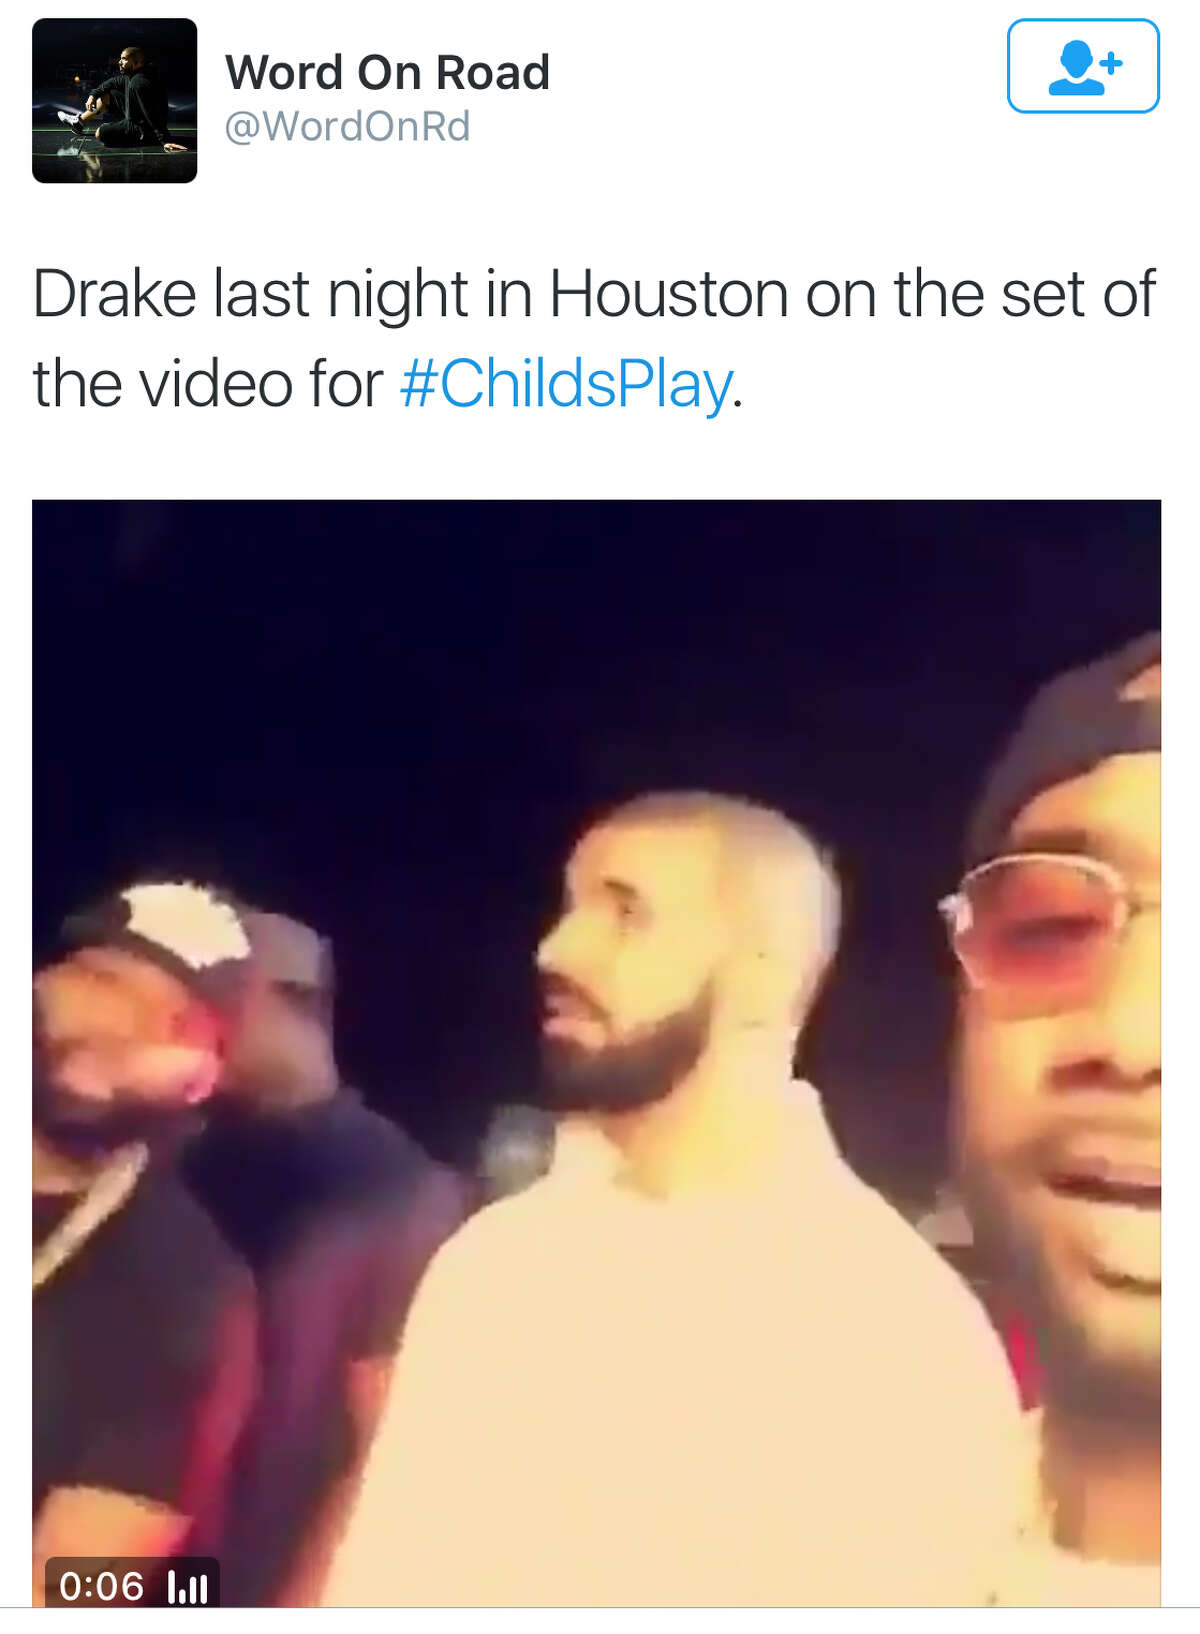 Rapper Drake was in Houston to shoot a video for Child's Play at VLive. He also visited the Cheesecake Factory. It was trending Wednesday night/Thursday morning on Twitter.